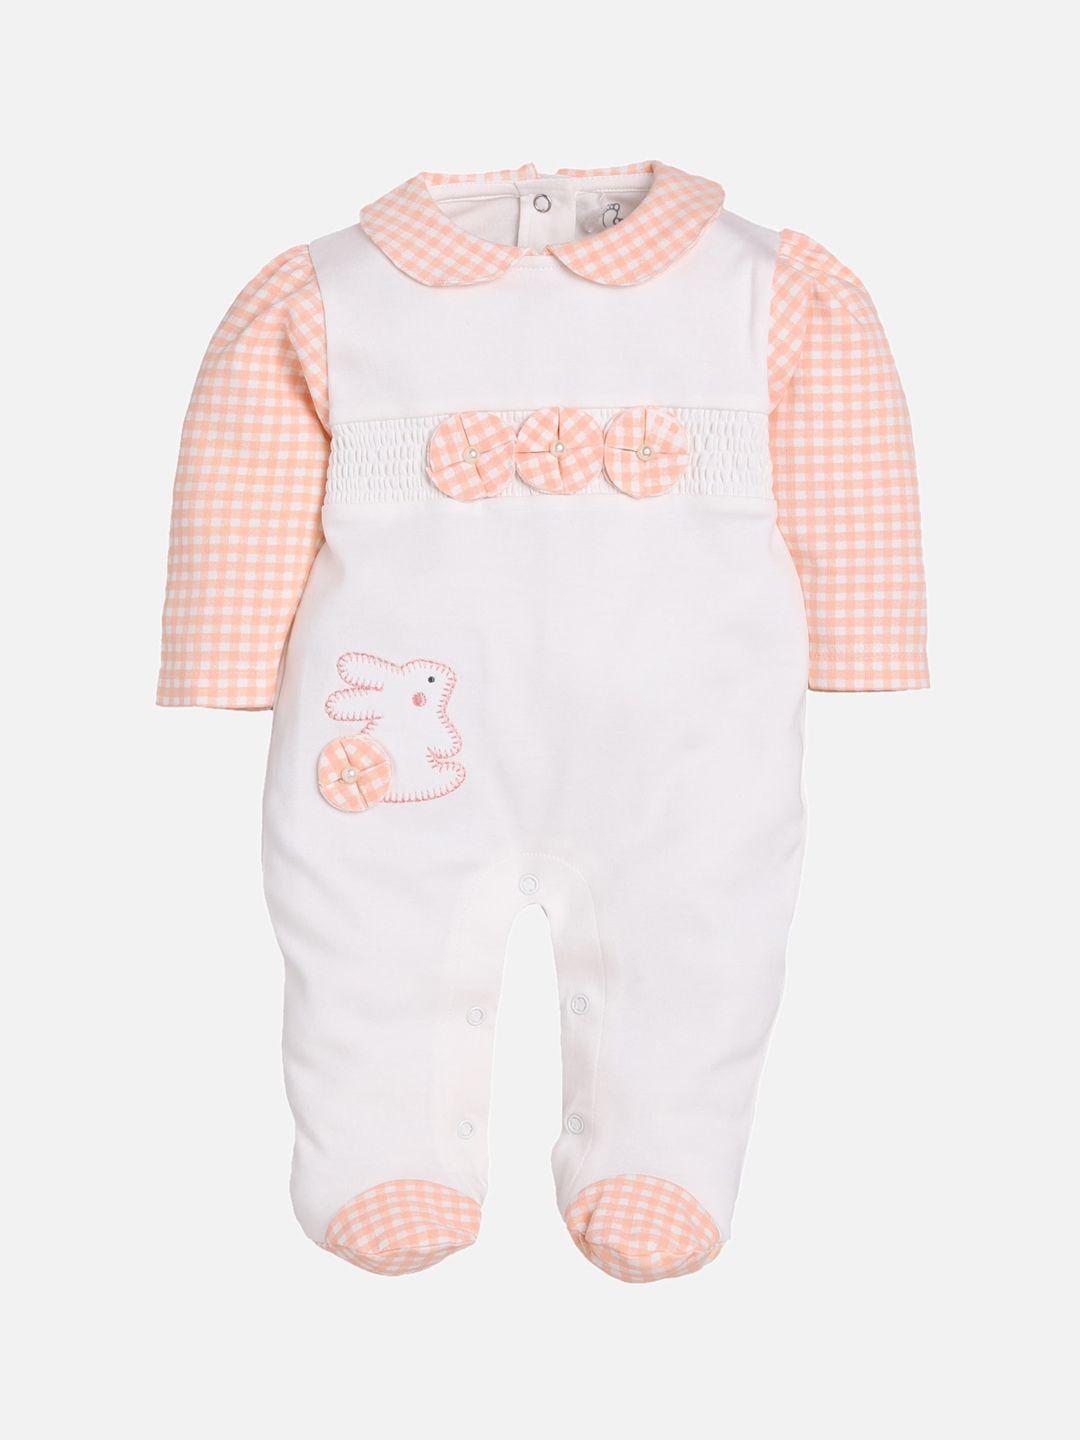 baby-go-infants-kids-white-&-peach-solid-cotton-rompers-with-applique-ornamentation